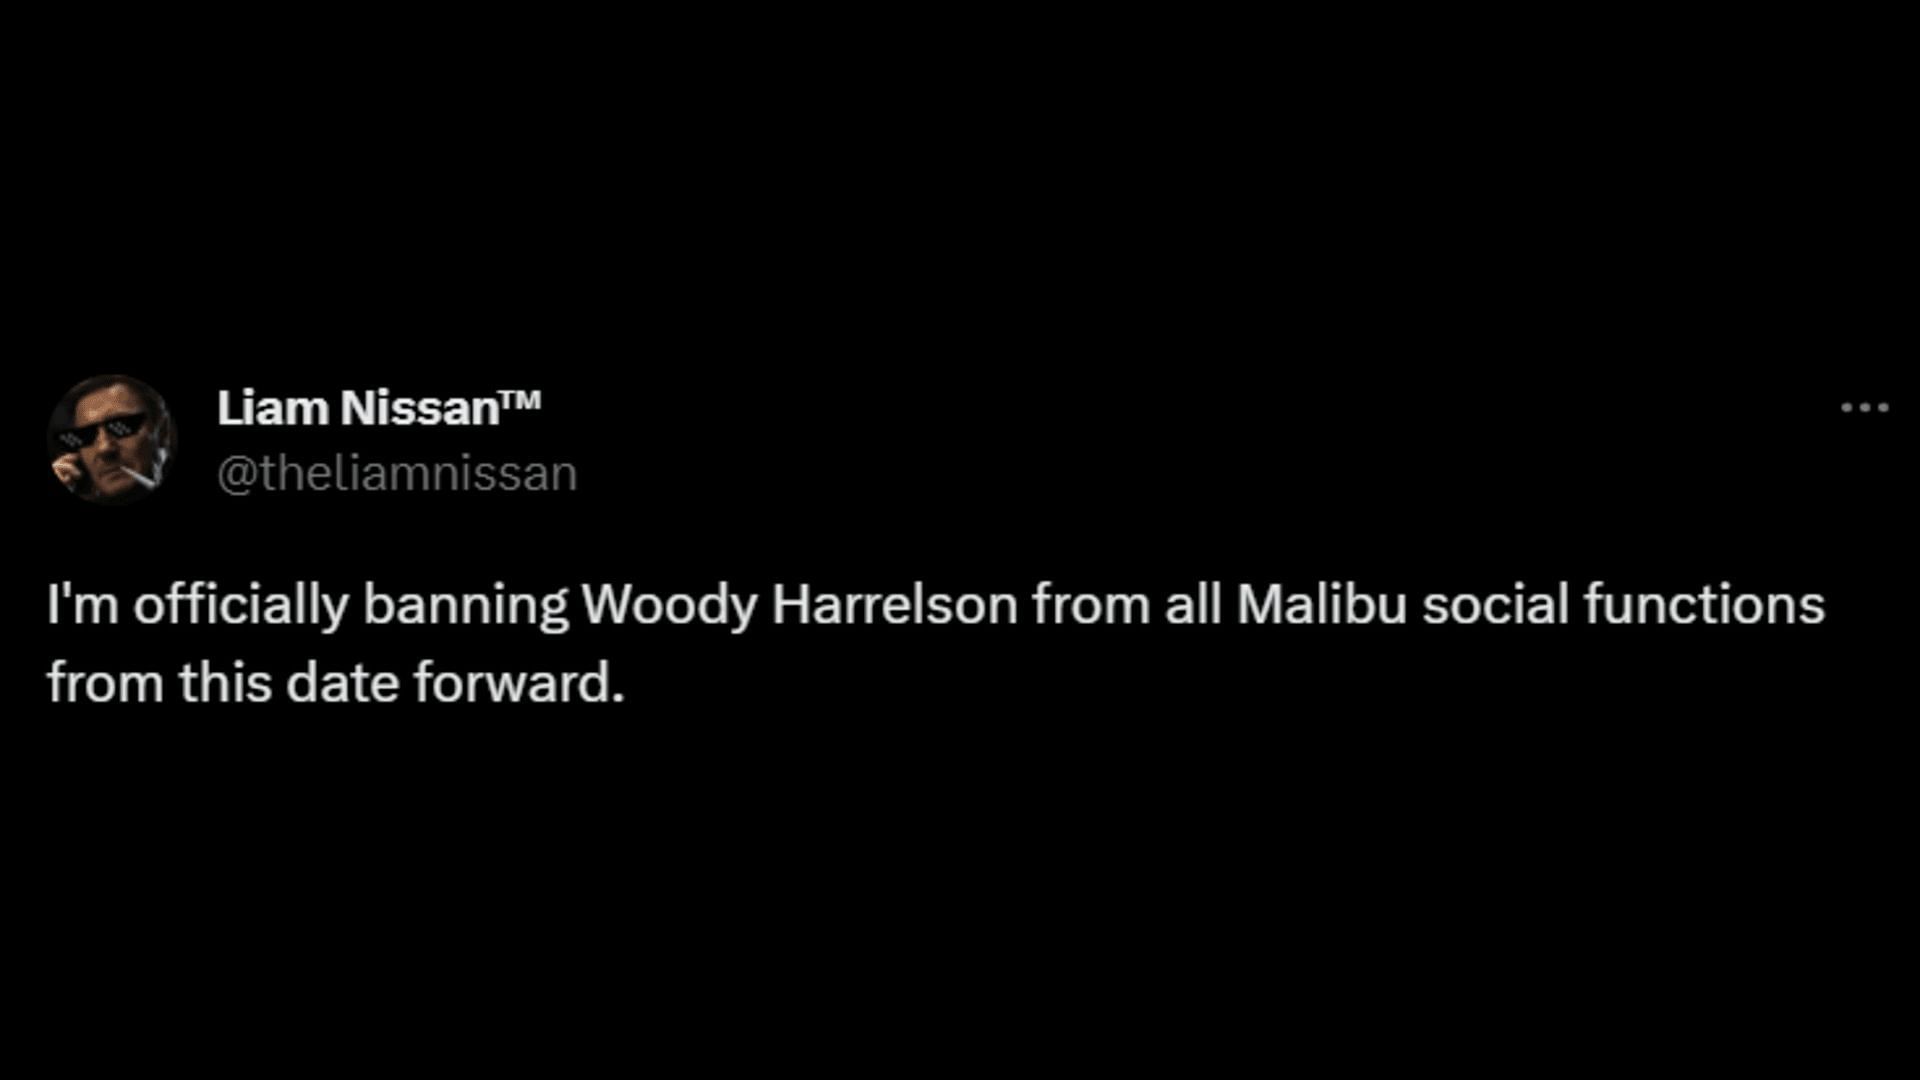 A Malibu resident says that he will boycott Woody from all social events. (Image via X/Liam Nissan)